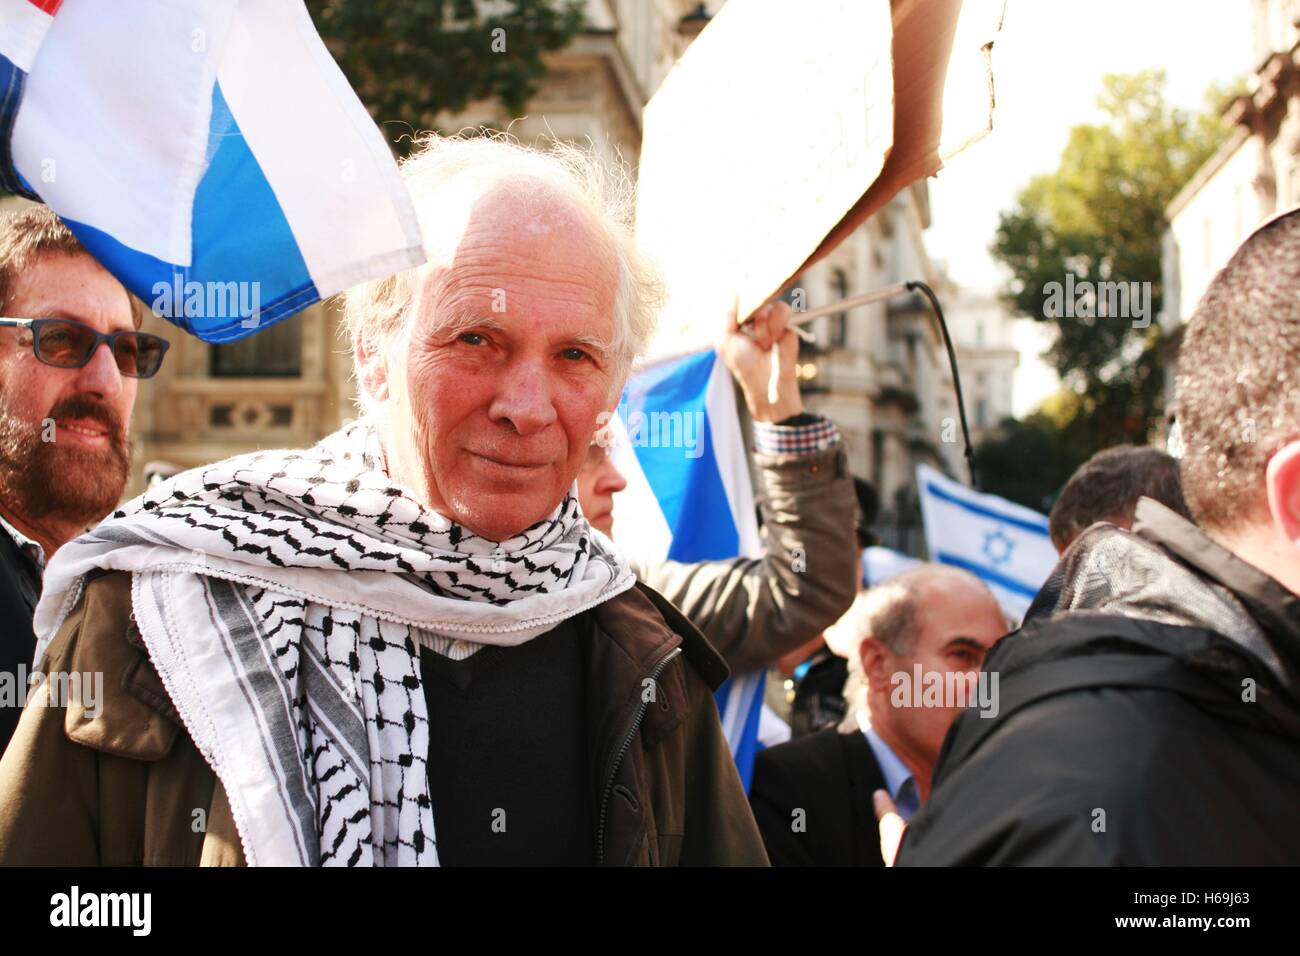 A Palestinian solidarity campaigner stands with British Zionists during a protest against the state visit of Israeli PM Benjamin Netanyahu, who campaigners say has committed war crimes in Gaza. The protesters have also submitted a 100,000 signatory petition for Netanyahu to be convicted of war crimes, while he visits the United Kingdom. Stock Photo